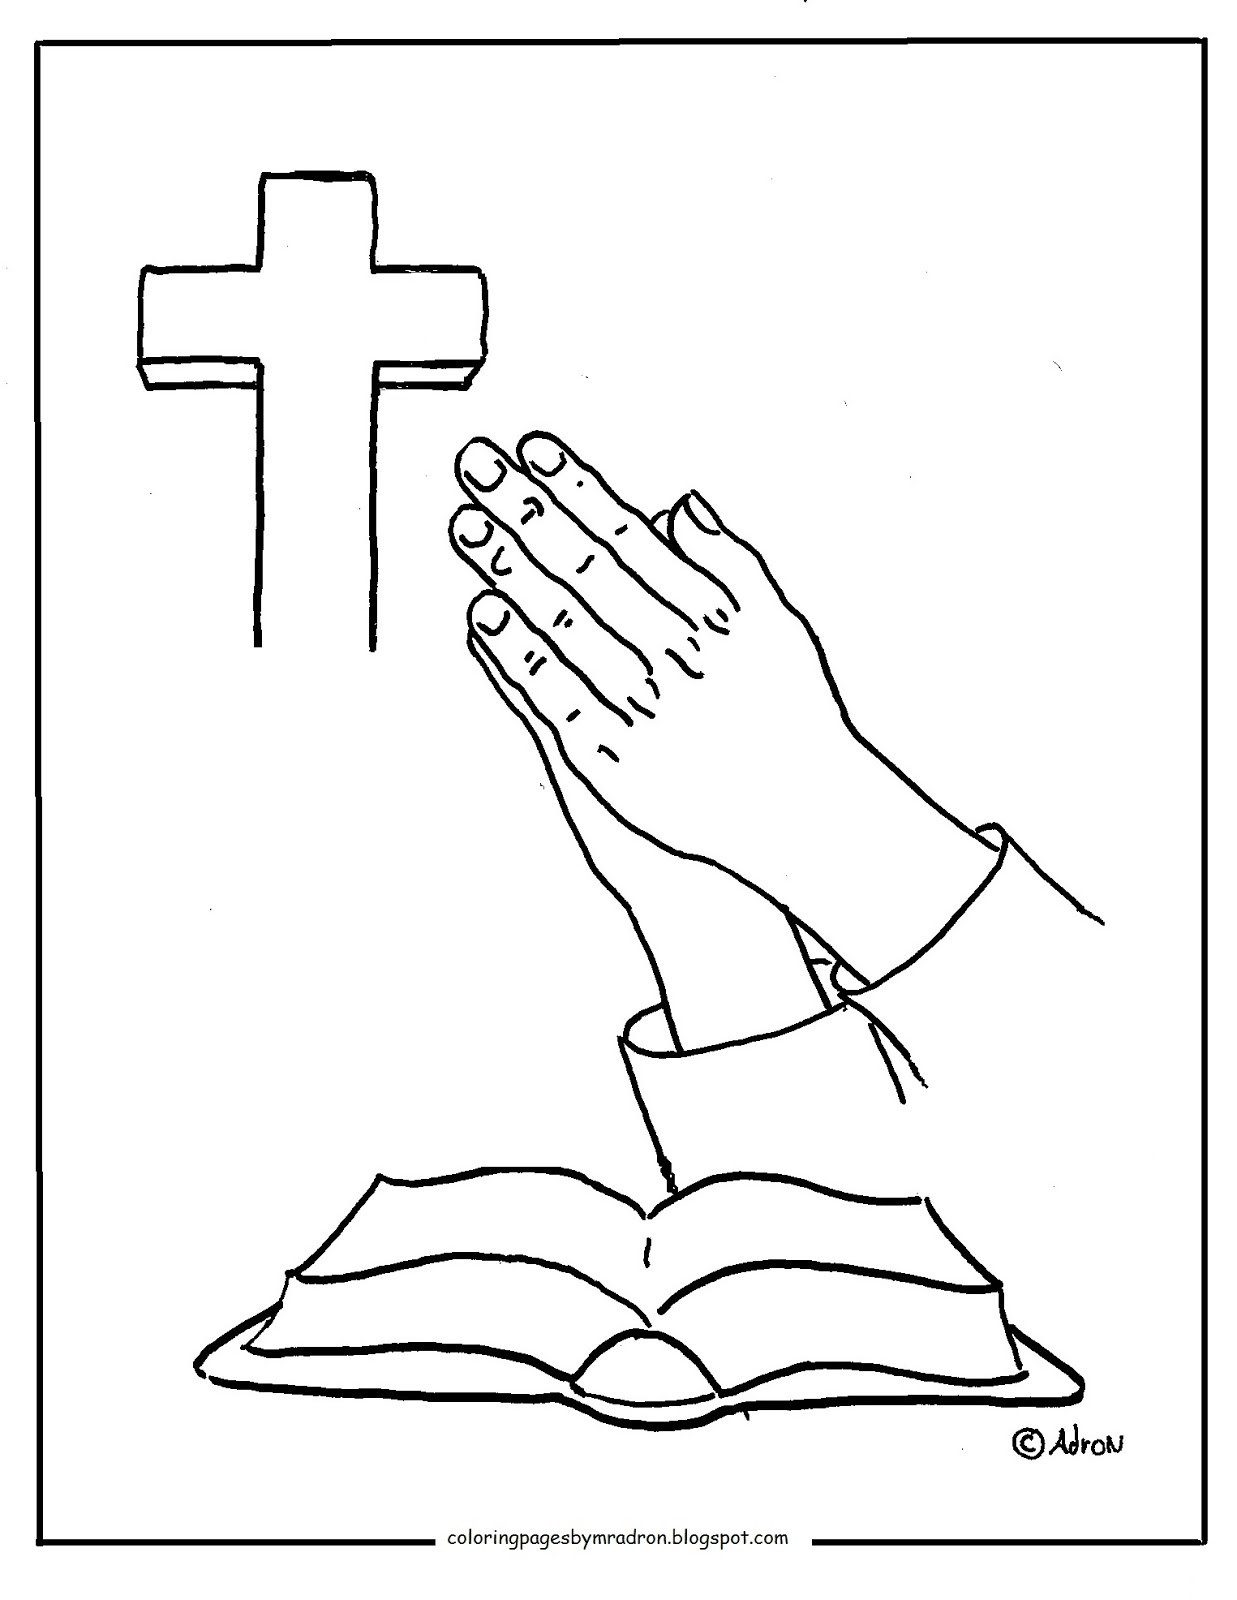 Prayer Hands Coloring Pages
 Coloring Pages for Kids by Mr Adron Free Printable